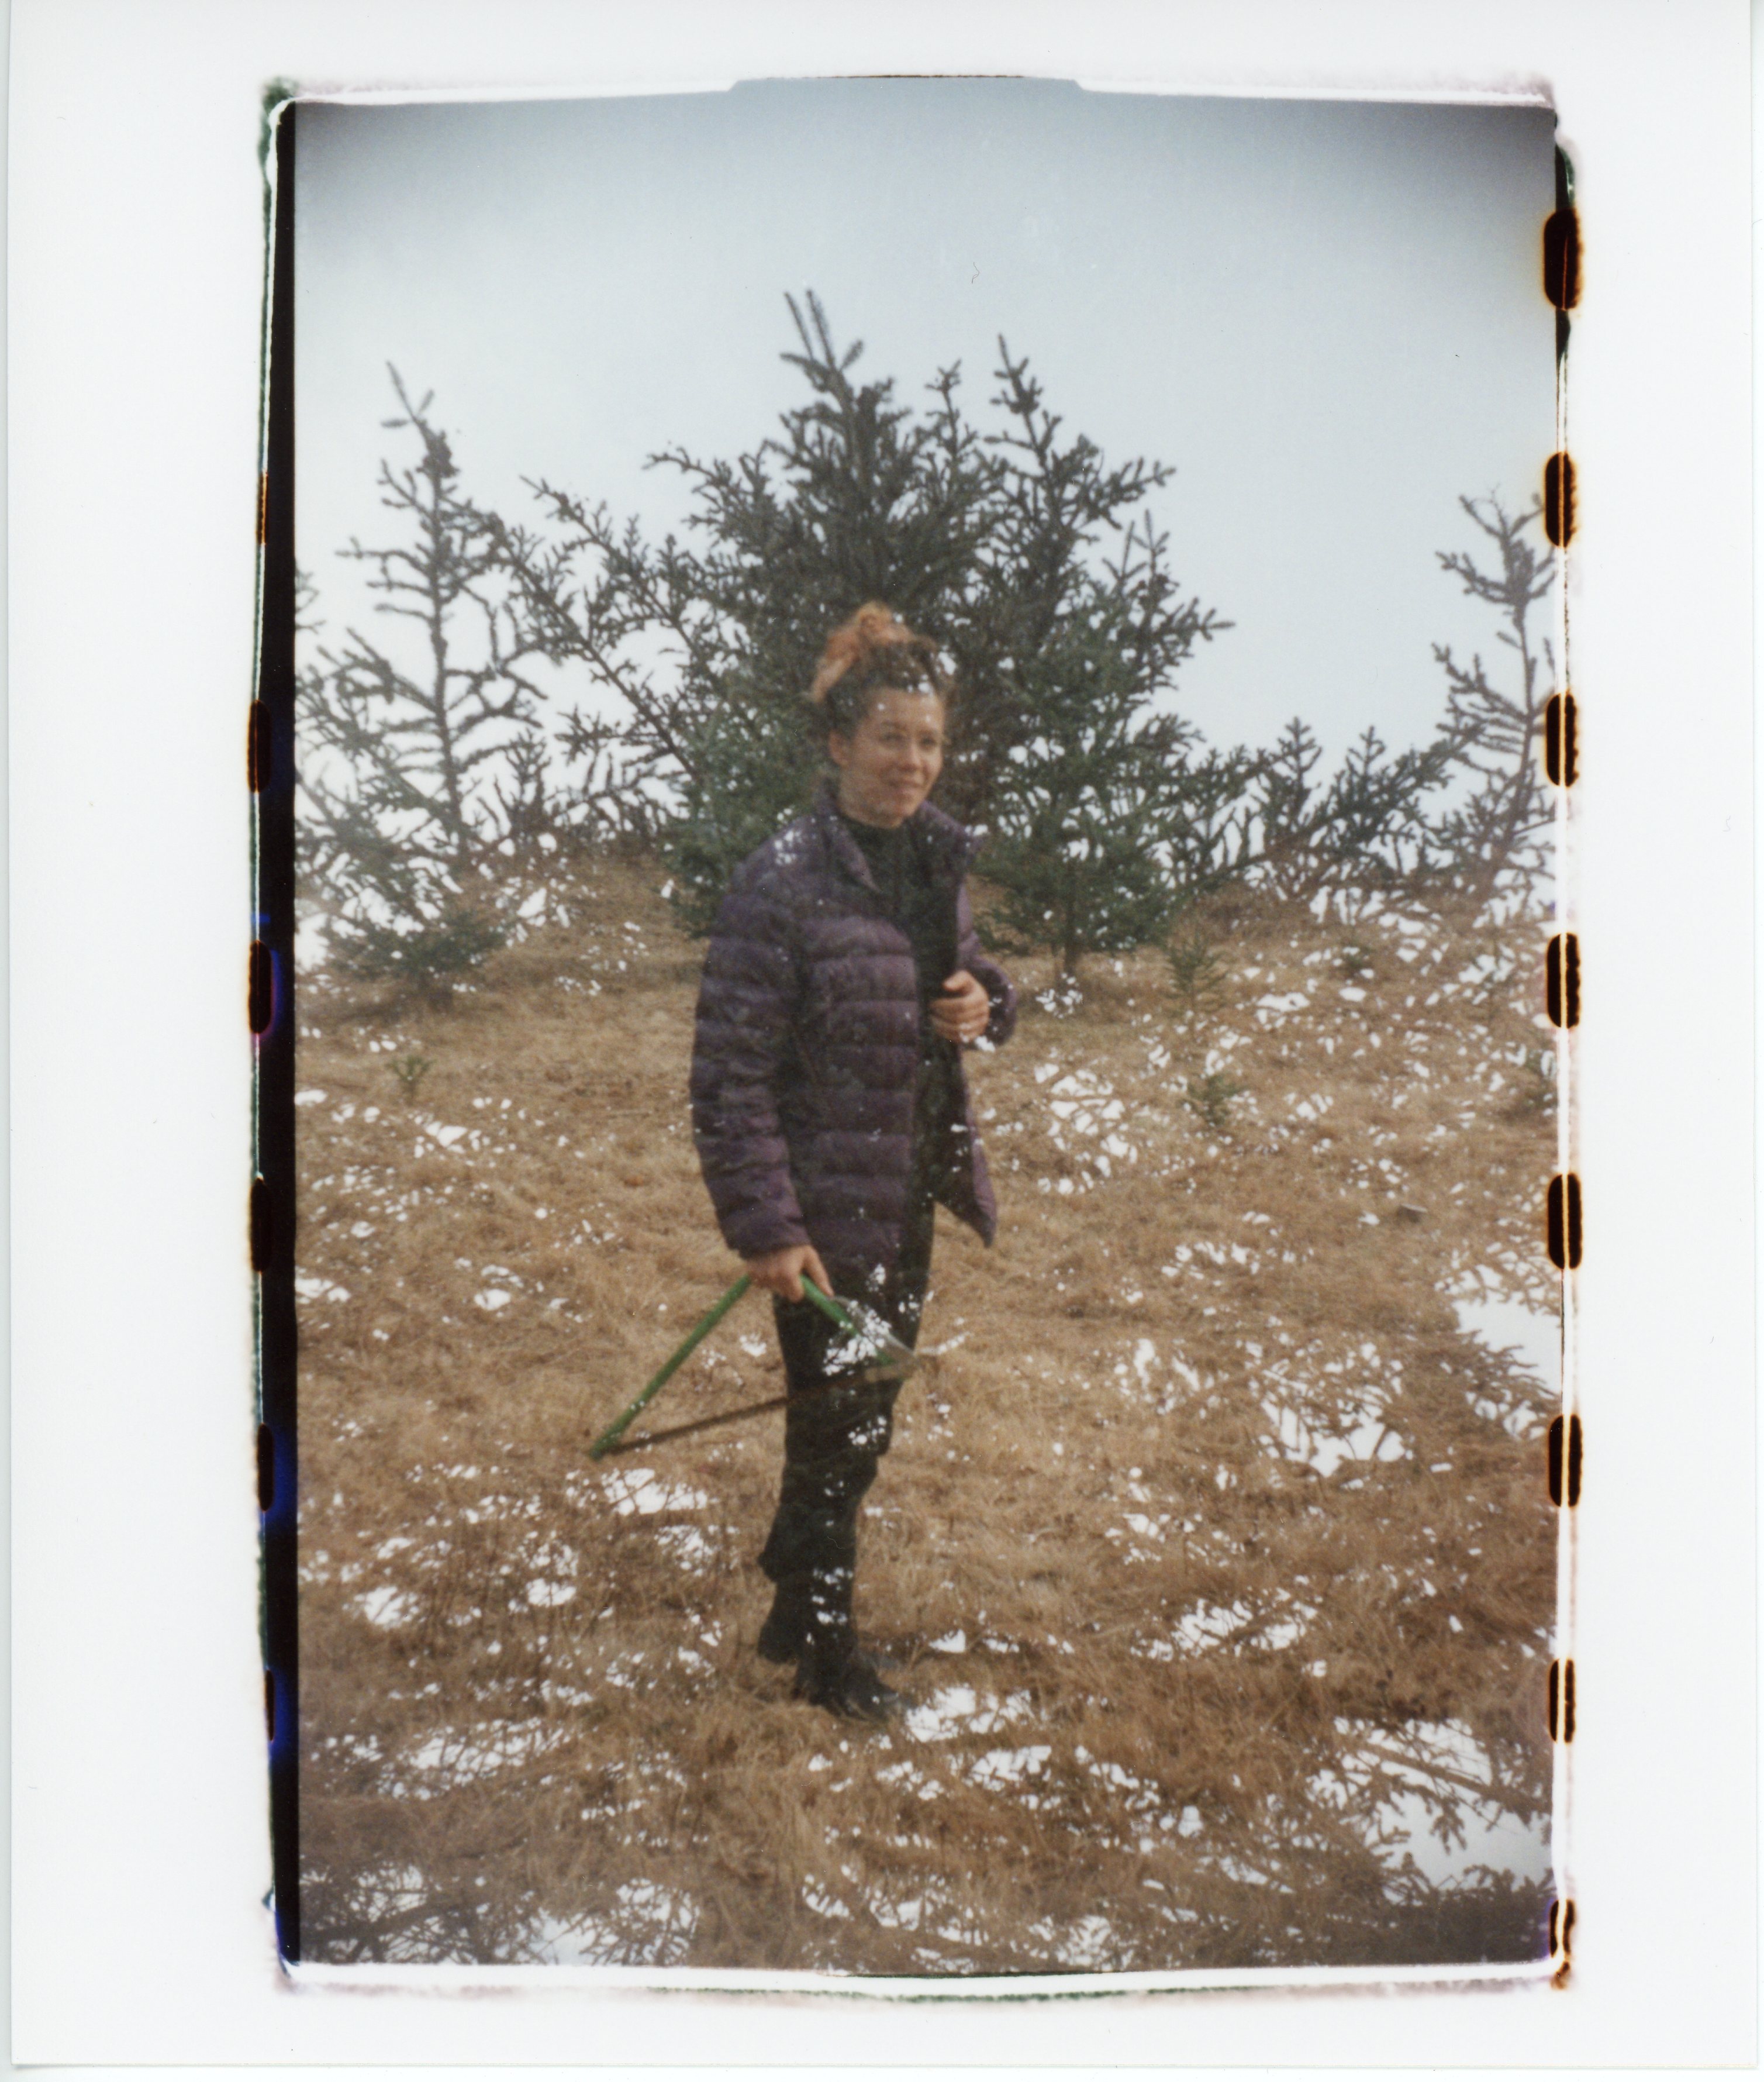 a 35mm color print with messy edges that show bits of the sprocket holes; the image is a double exposure of a person standing in the center of the frame overlaid the top of a spruce tree; the overcast sky behind the tree is fully exposed, so only the overlap with the tree branches is visible from the shot with the person; they are wearing a purple quilted parka and are holding a bow saw; their hair is brown with bleached tips and is in a bun; they are standing and looking at a 45º angle away from the camera towards the right side of the image; the ground they are standing on is dead grass and there is a base of a spruce tree somewhat behind them